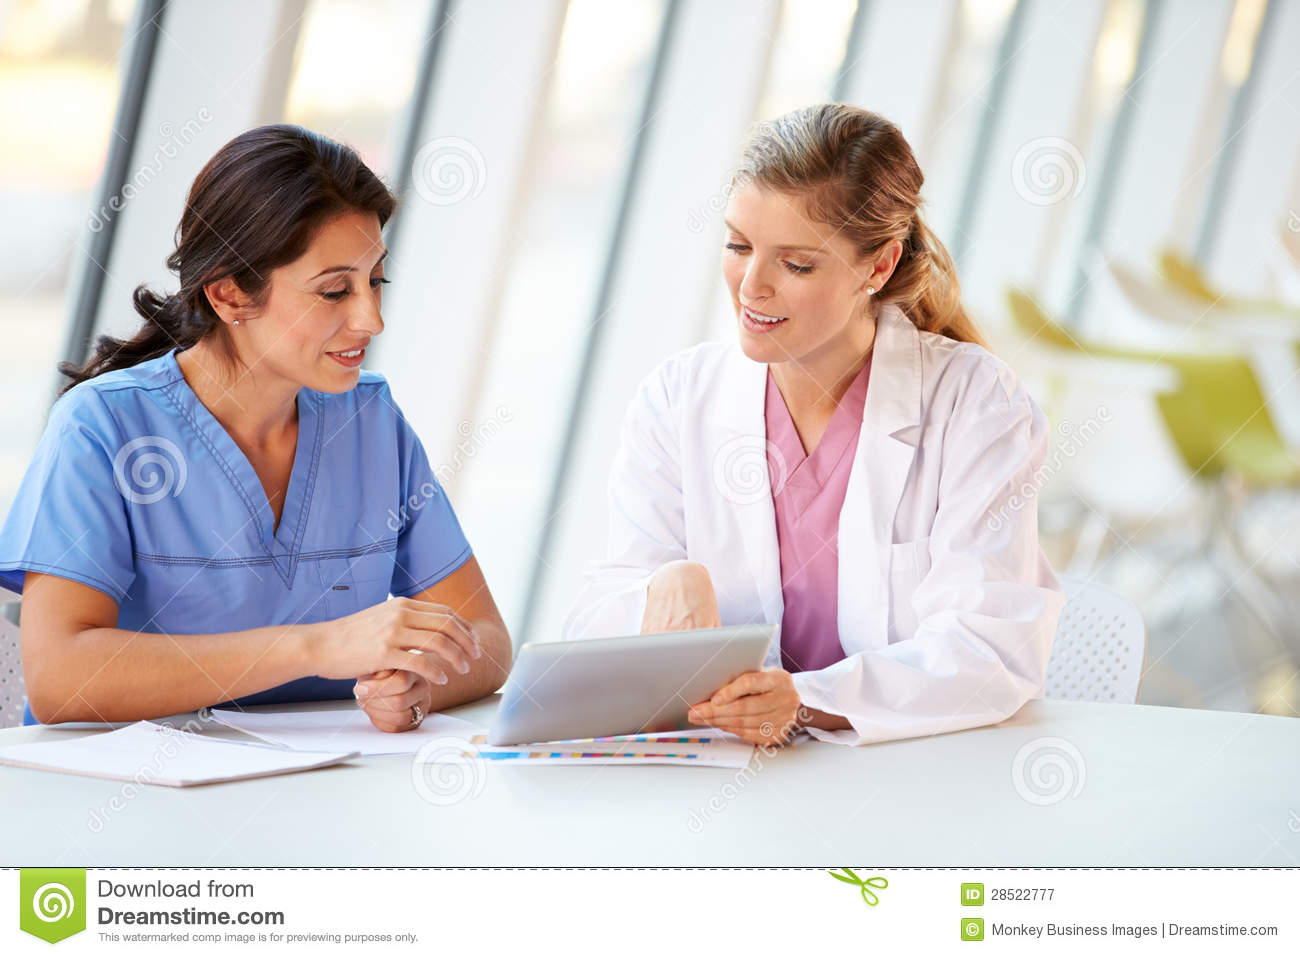 Female Doctor And Nurse Having Meeting Royalty Free Stock Photography